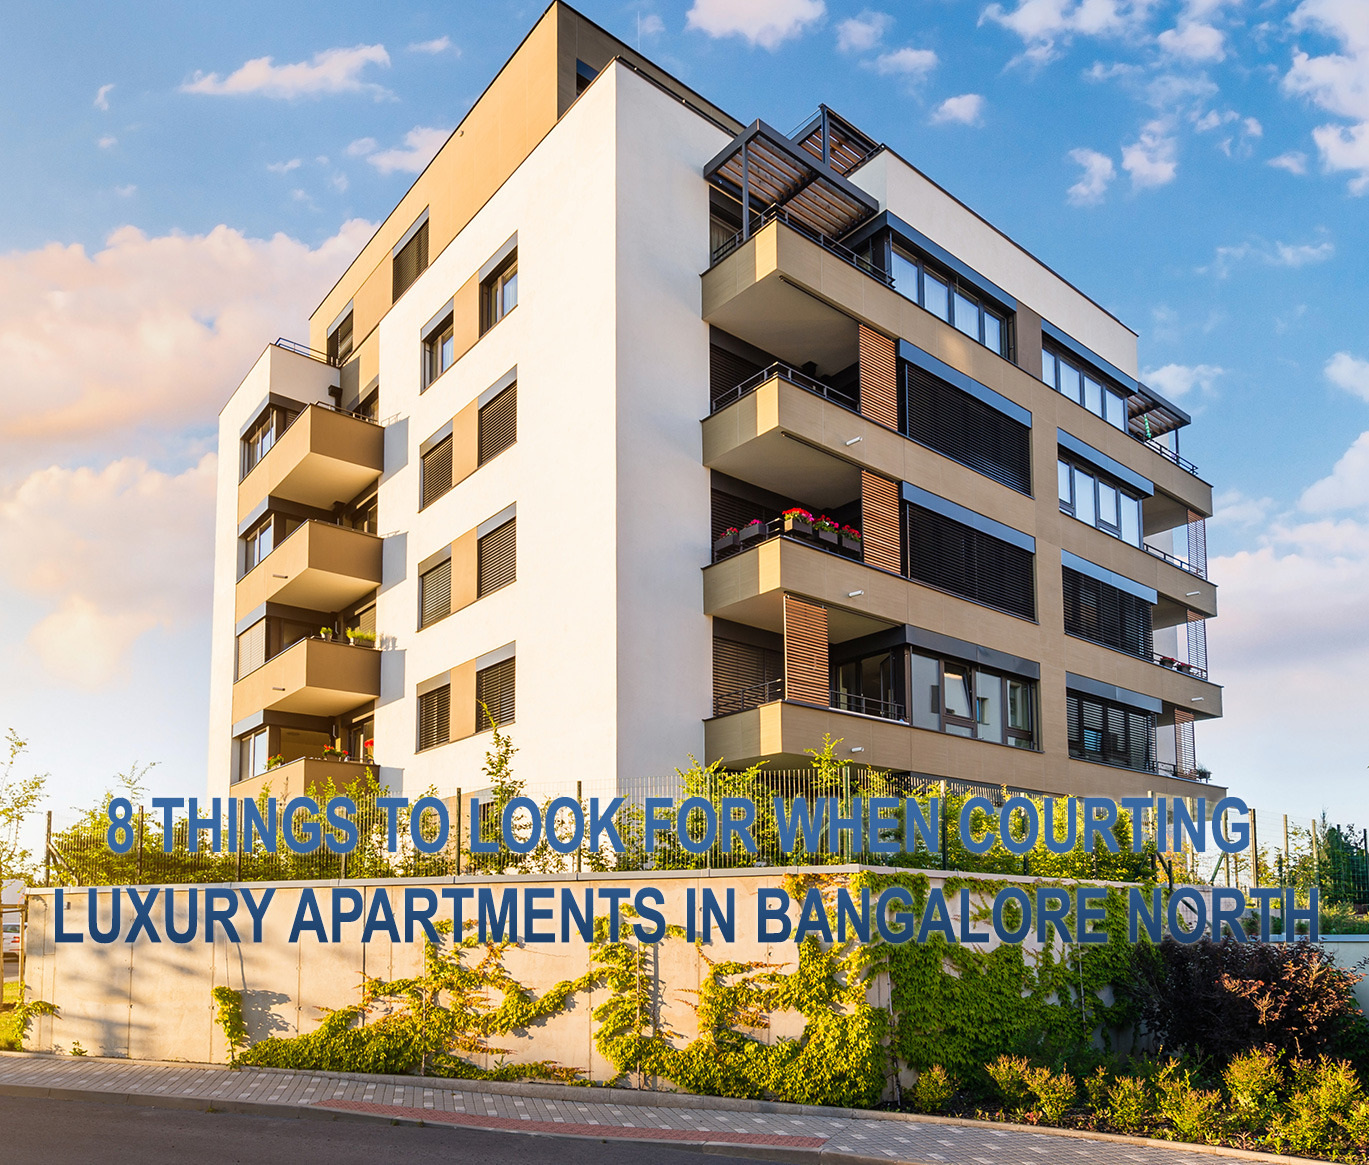 8 Things to Look for When Courting Luxury Apartments in Bangalore North